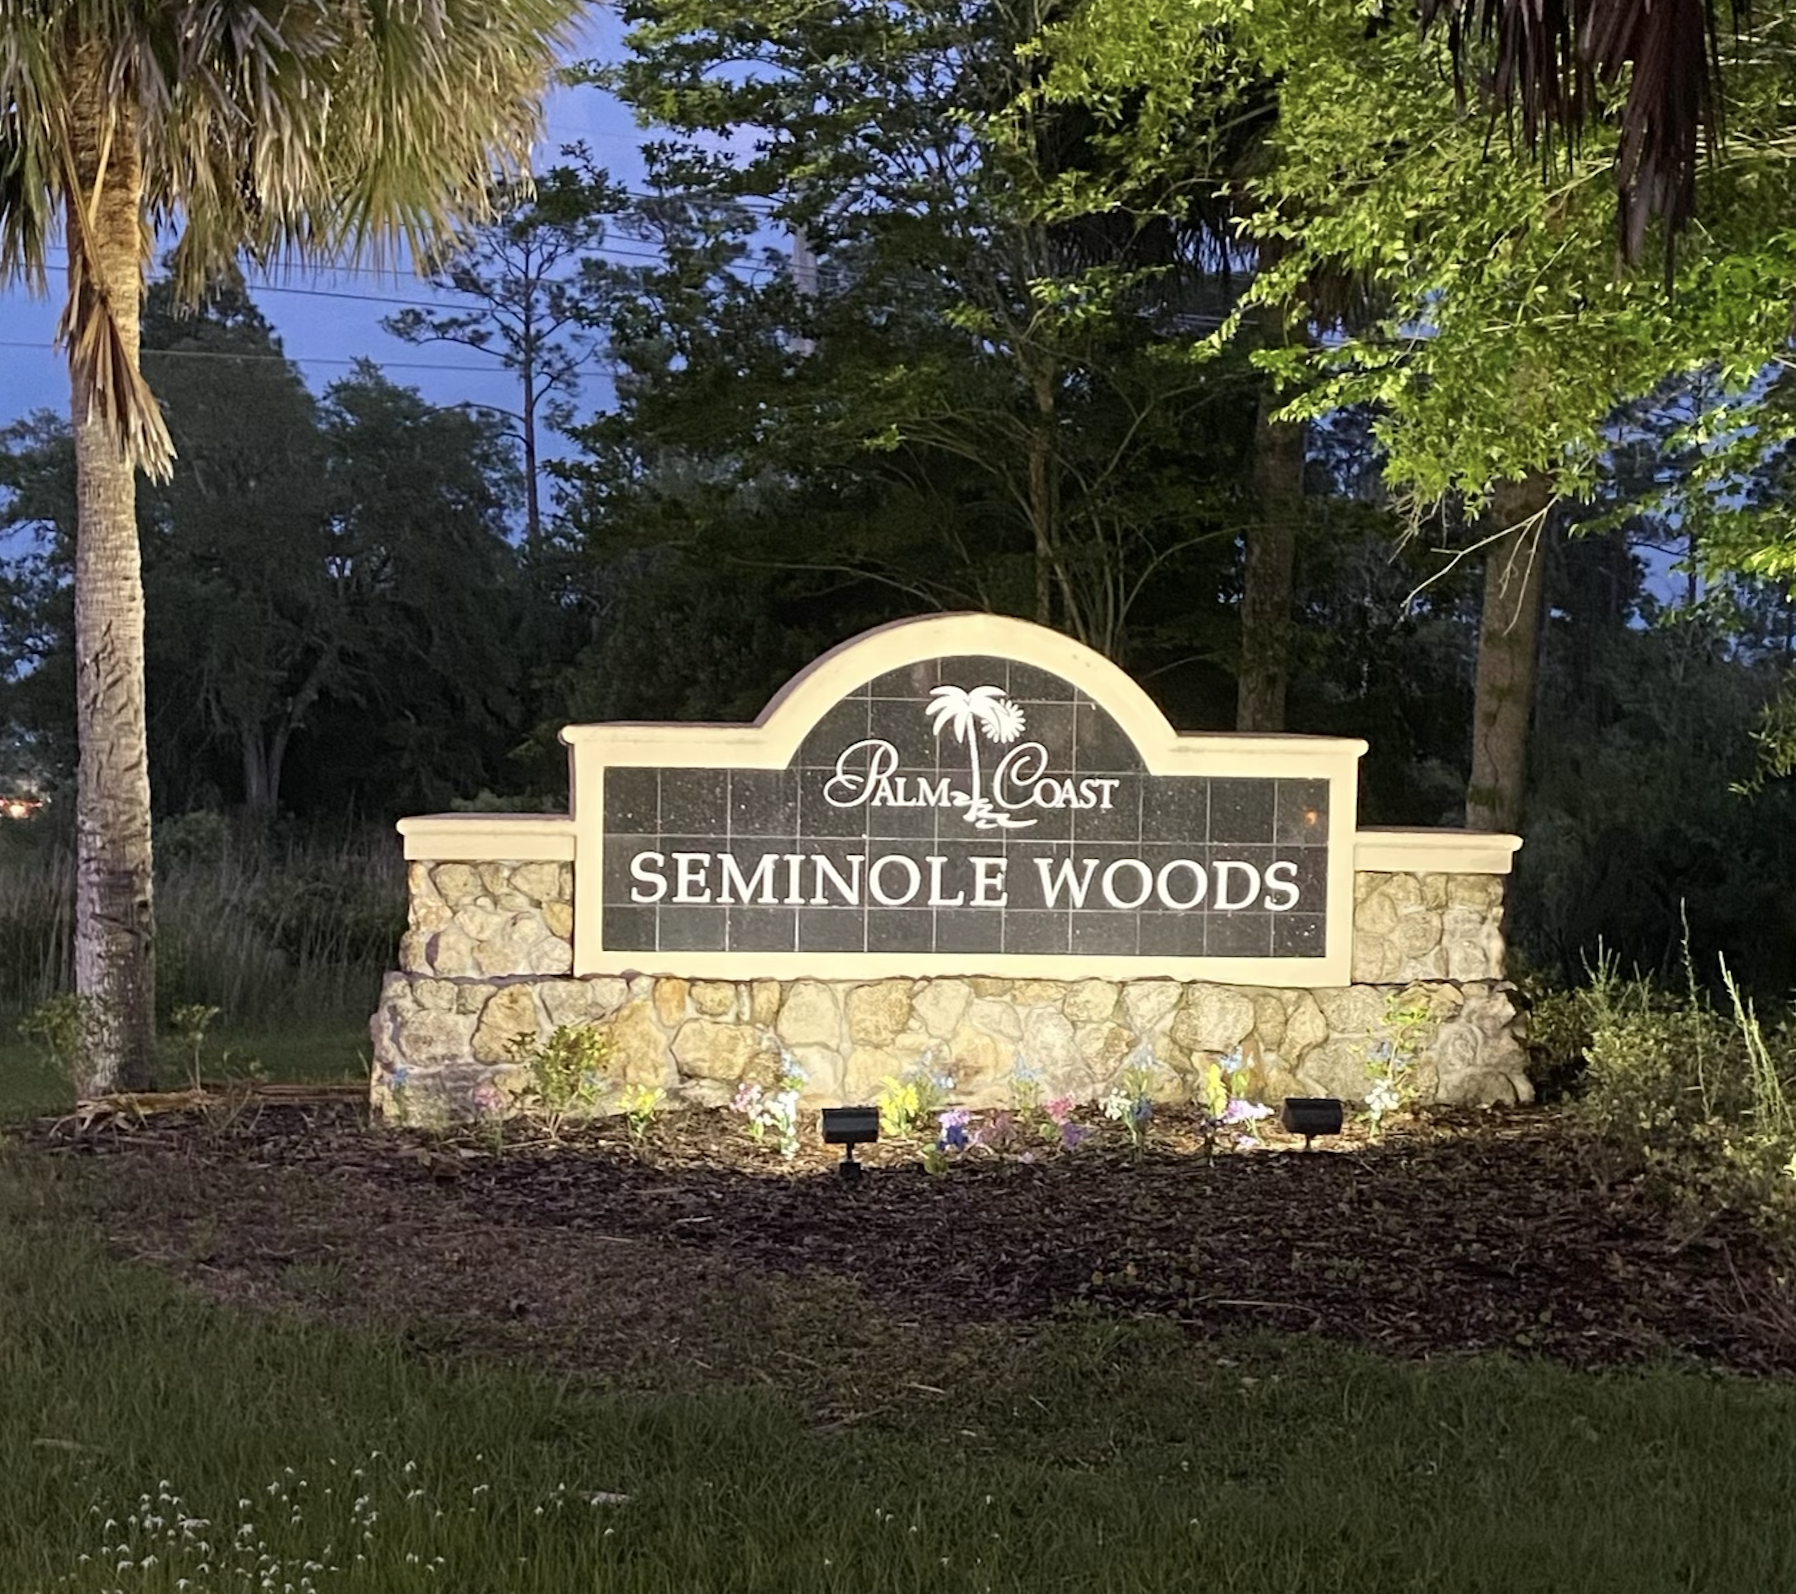 Palm Coast neighborhoods are known by names like Seminole Woods, but also by letters, as in the S Section. Residents who live in the B Section, however are not necessarily in Evacuation Zone B.